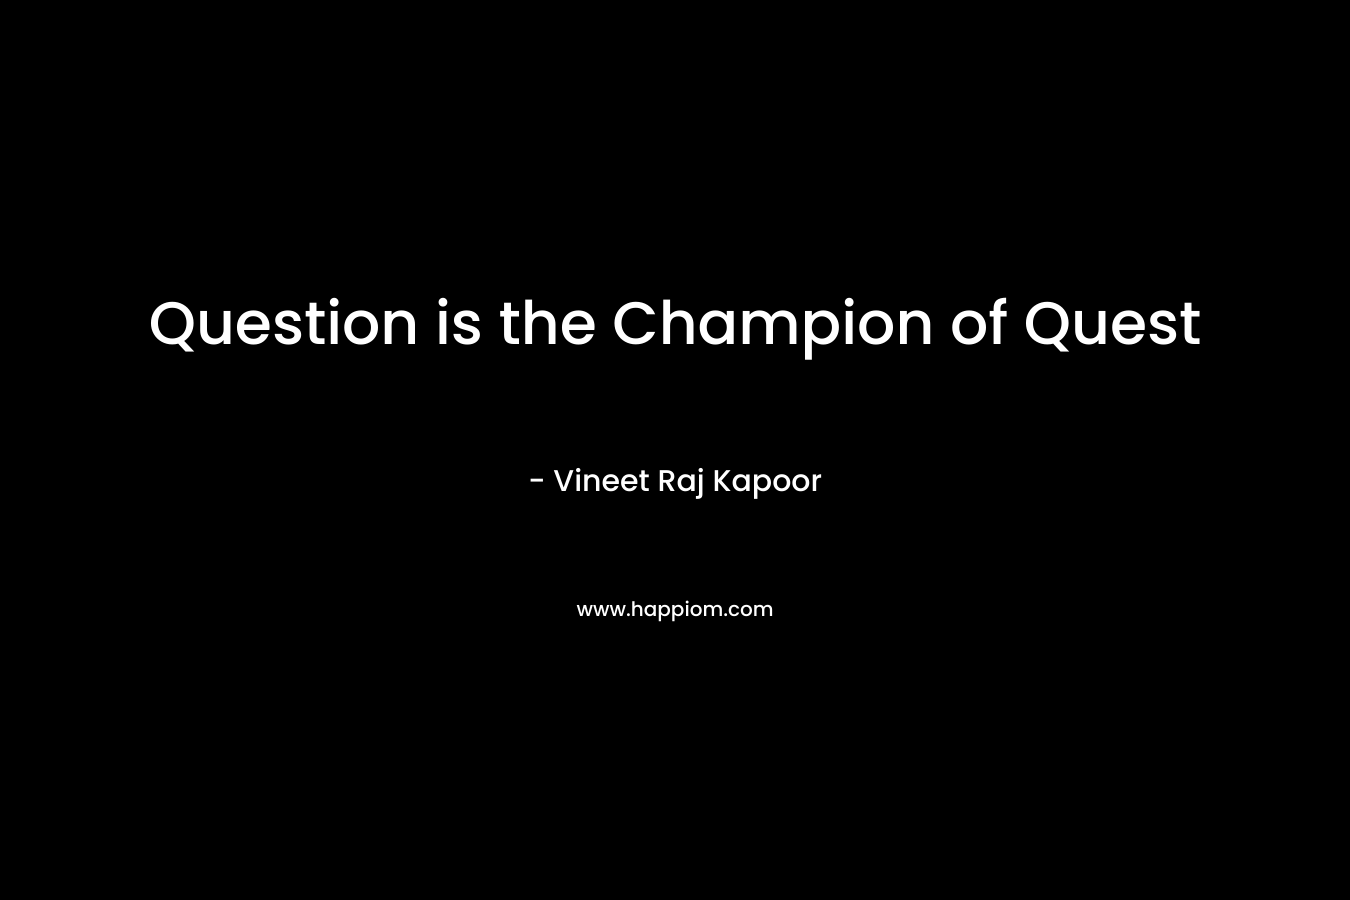 Question is the Champion of Quest